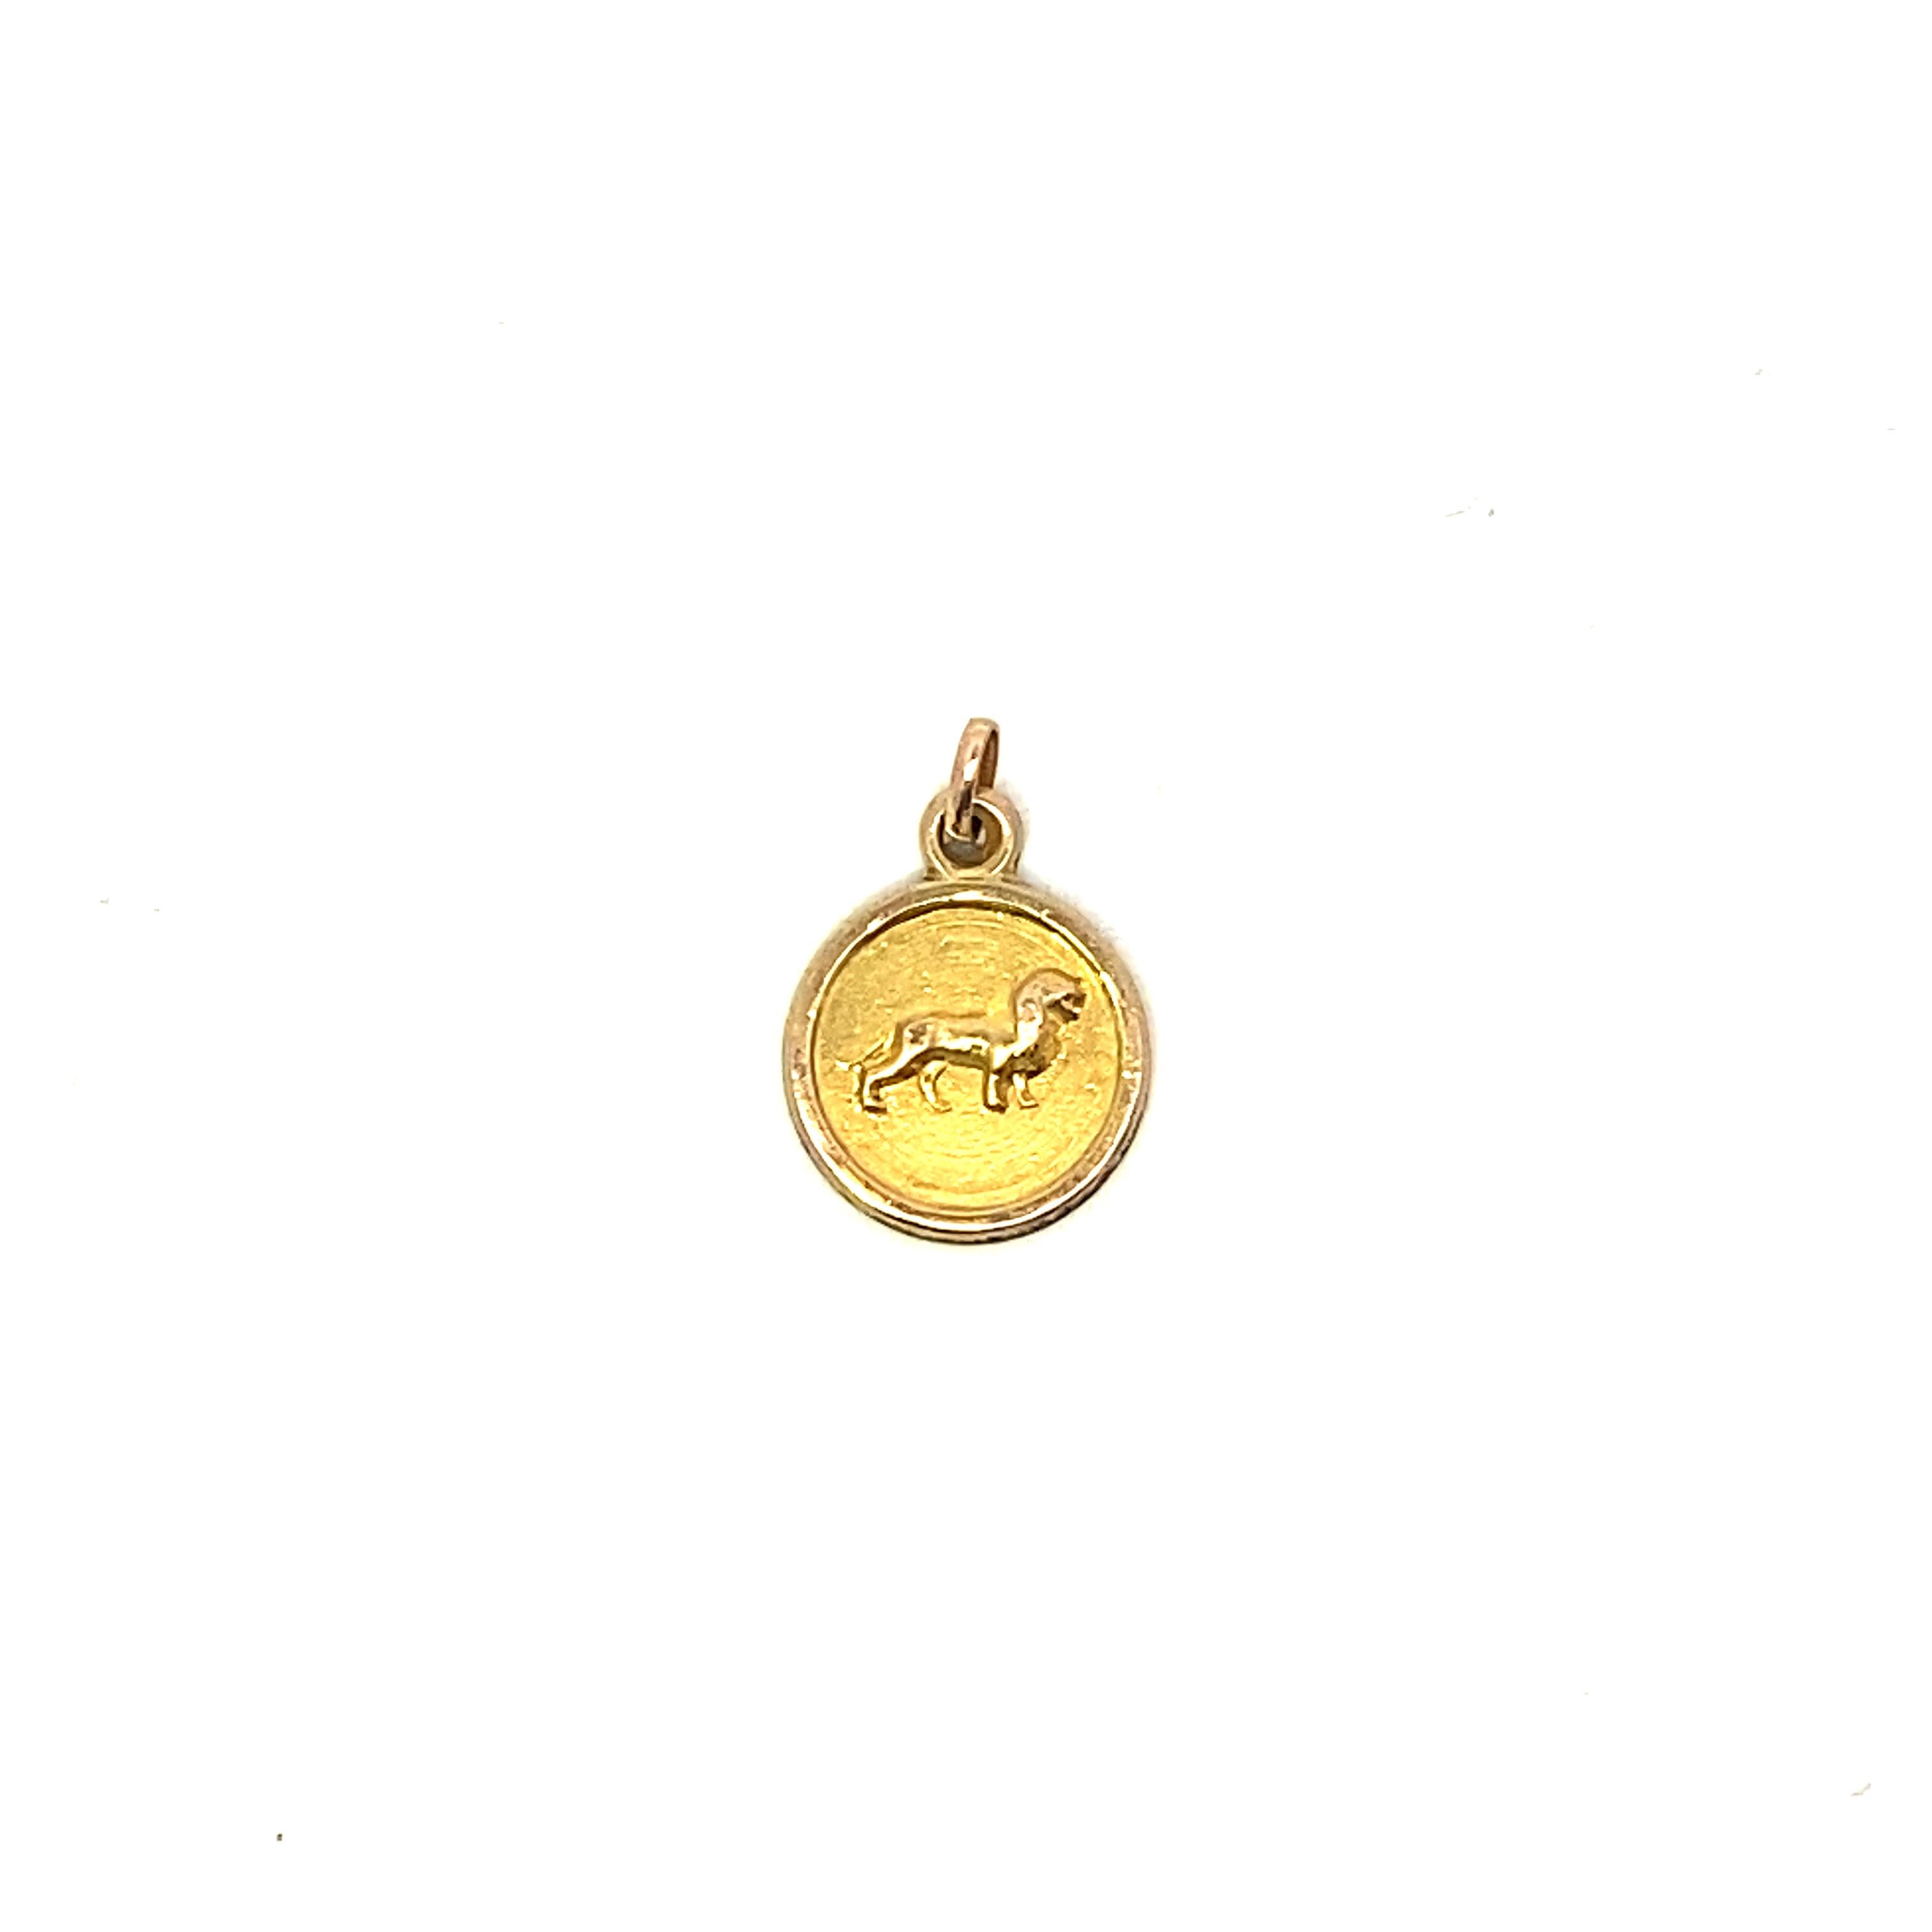 Offering our solid 14k yellow gold Leo Zodiac Charm, perfect for a necklace or charm bracelet. Measuring 0.7Dwt/1.0gm and 13mm in diameter, this dainty charm will fit any chain or charm bracelet with ease.  Charm has a small jump ring included for